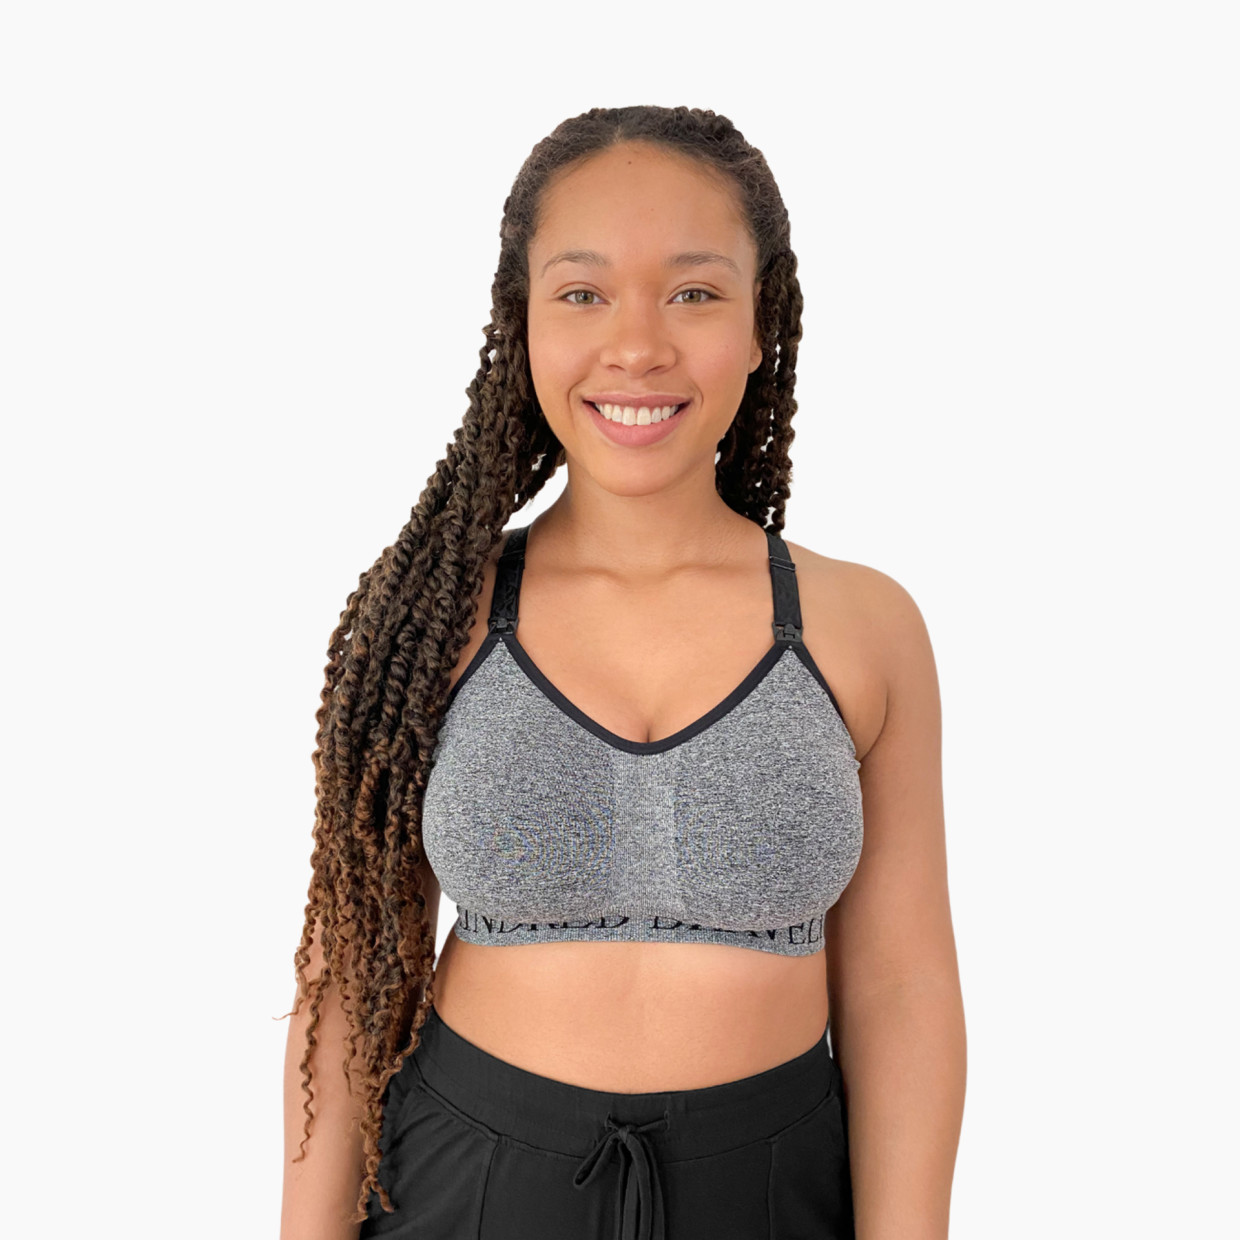 Kindred Bravely Sublime Support Low Impact Nursing & Maternity Sports Bra - Grey Heather, Medium-Busty.